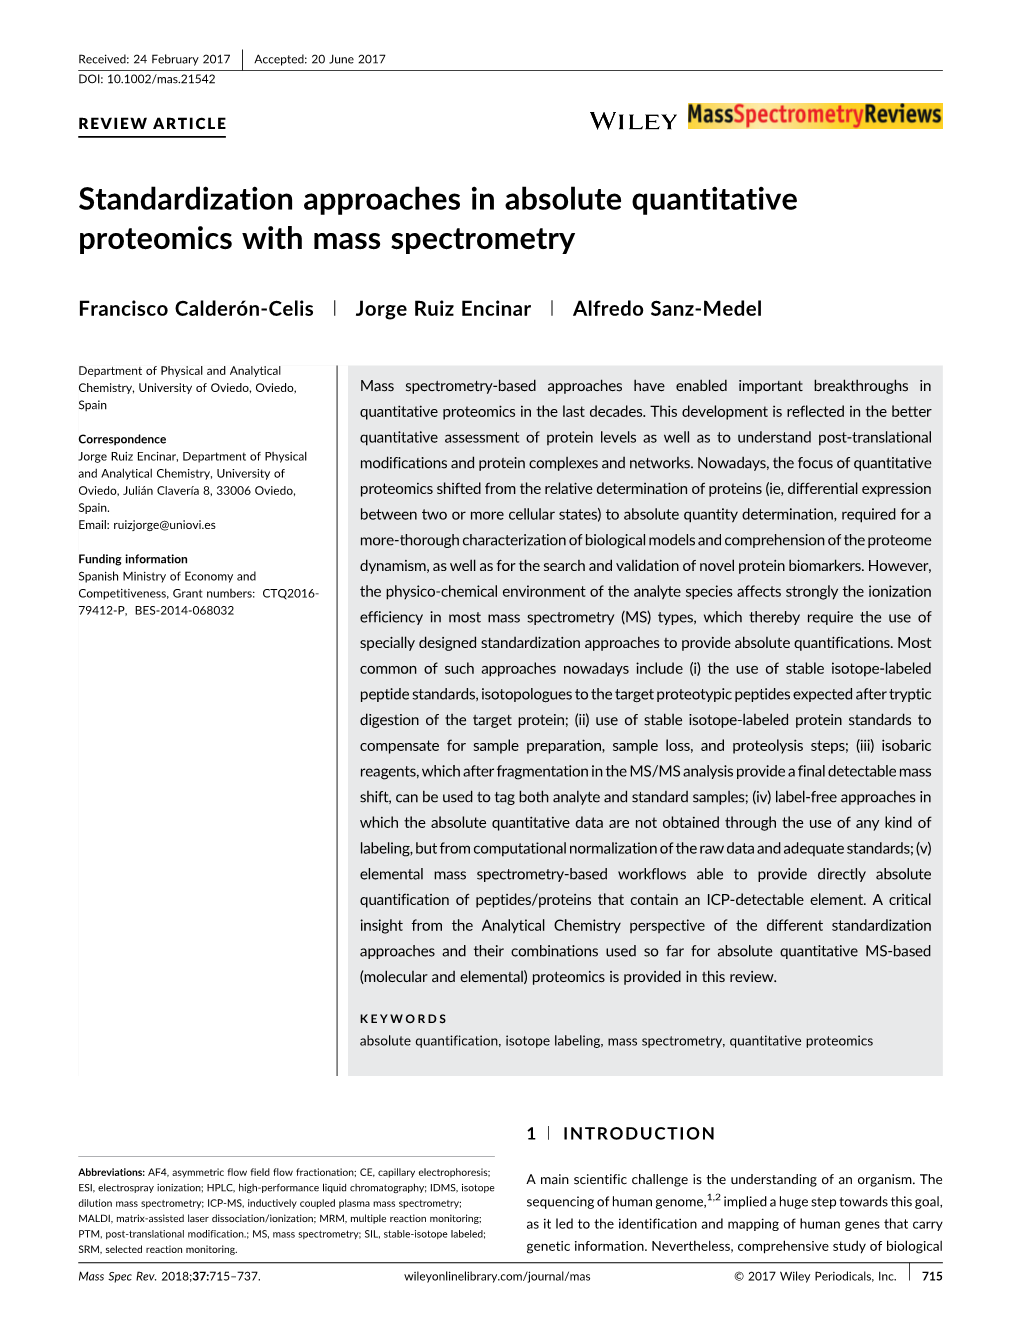 Standardization Approaches in Absolute Quantitative Proteomics with Mass Spectrometry